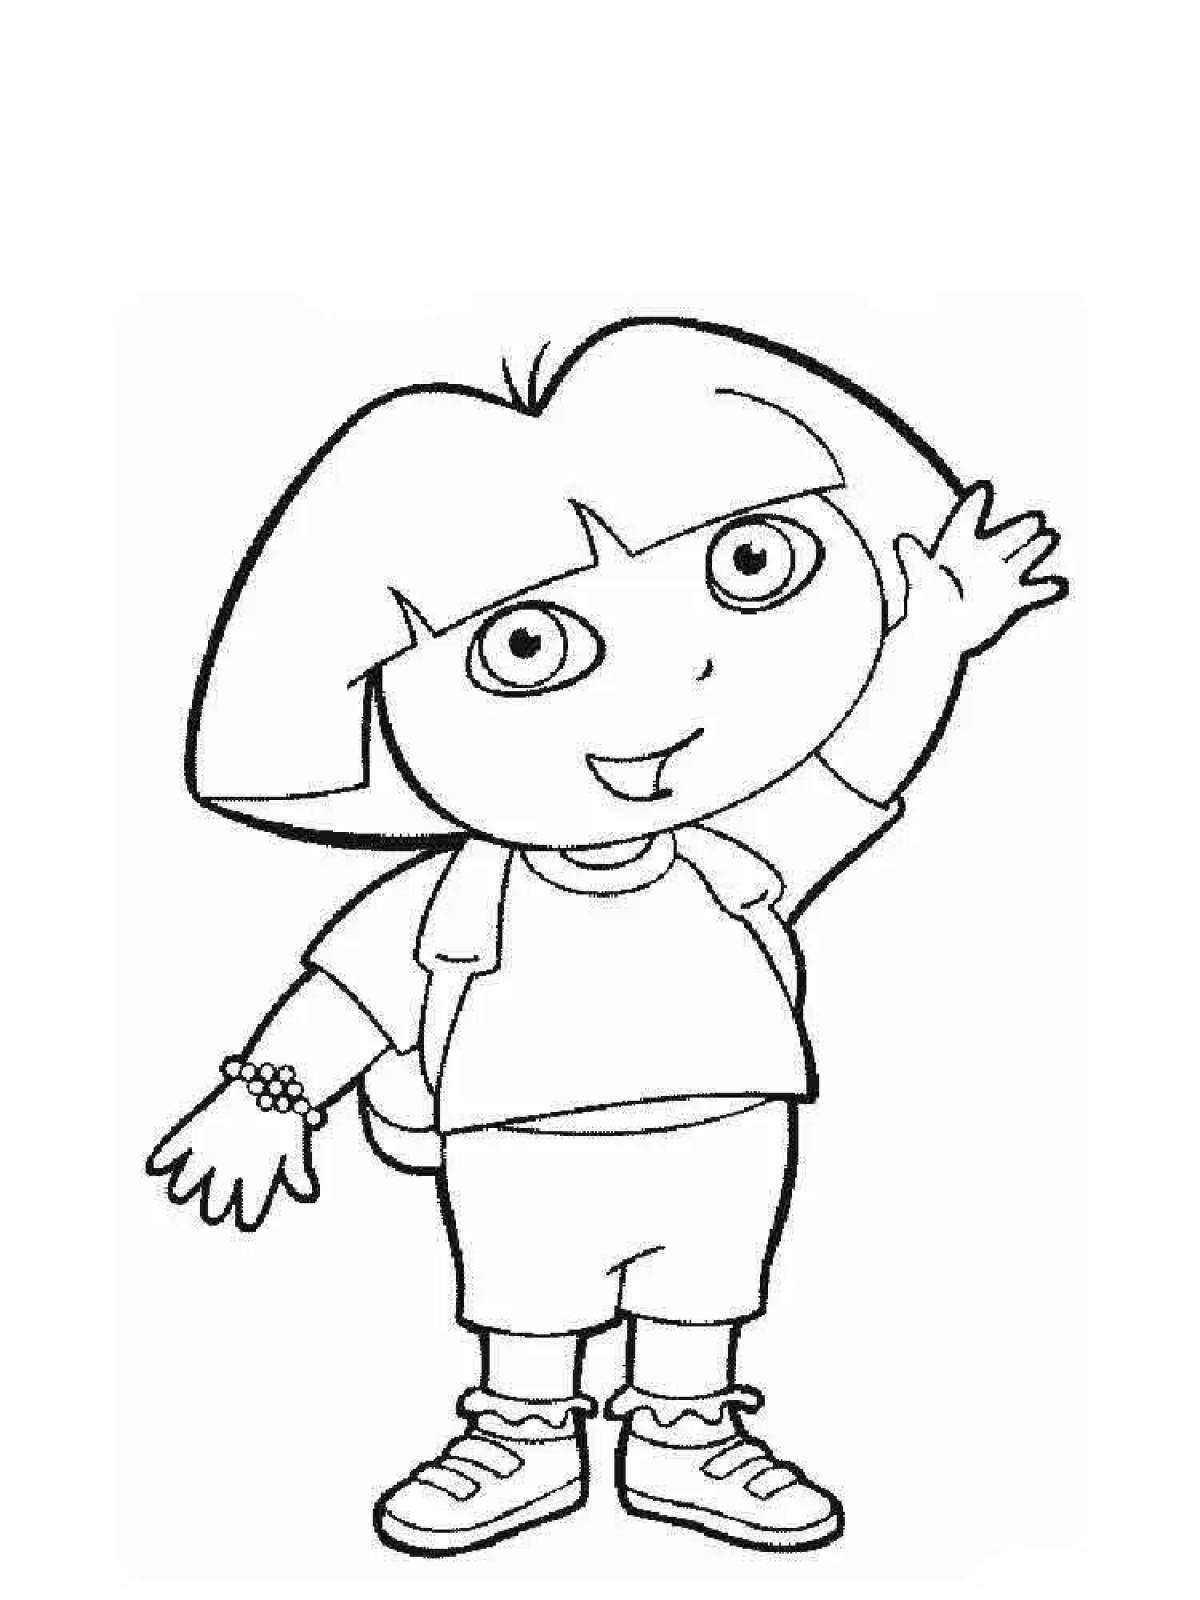 Color-frenzy dasha coloring page